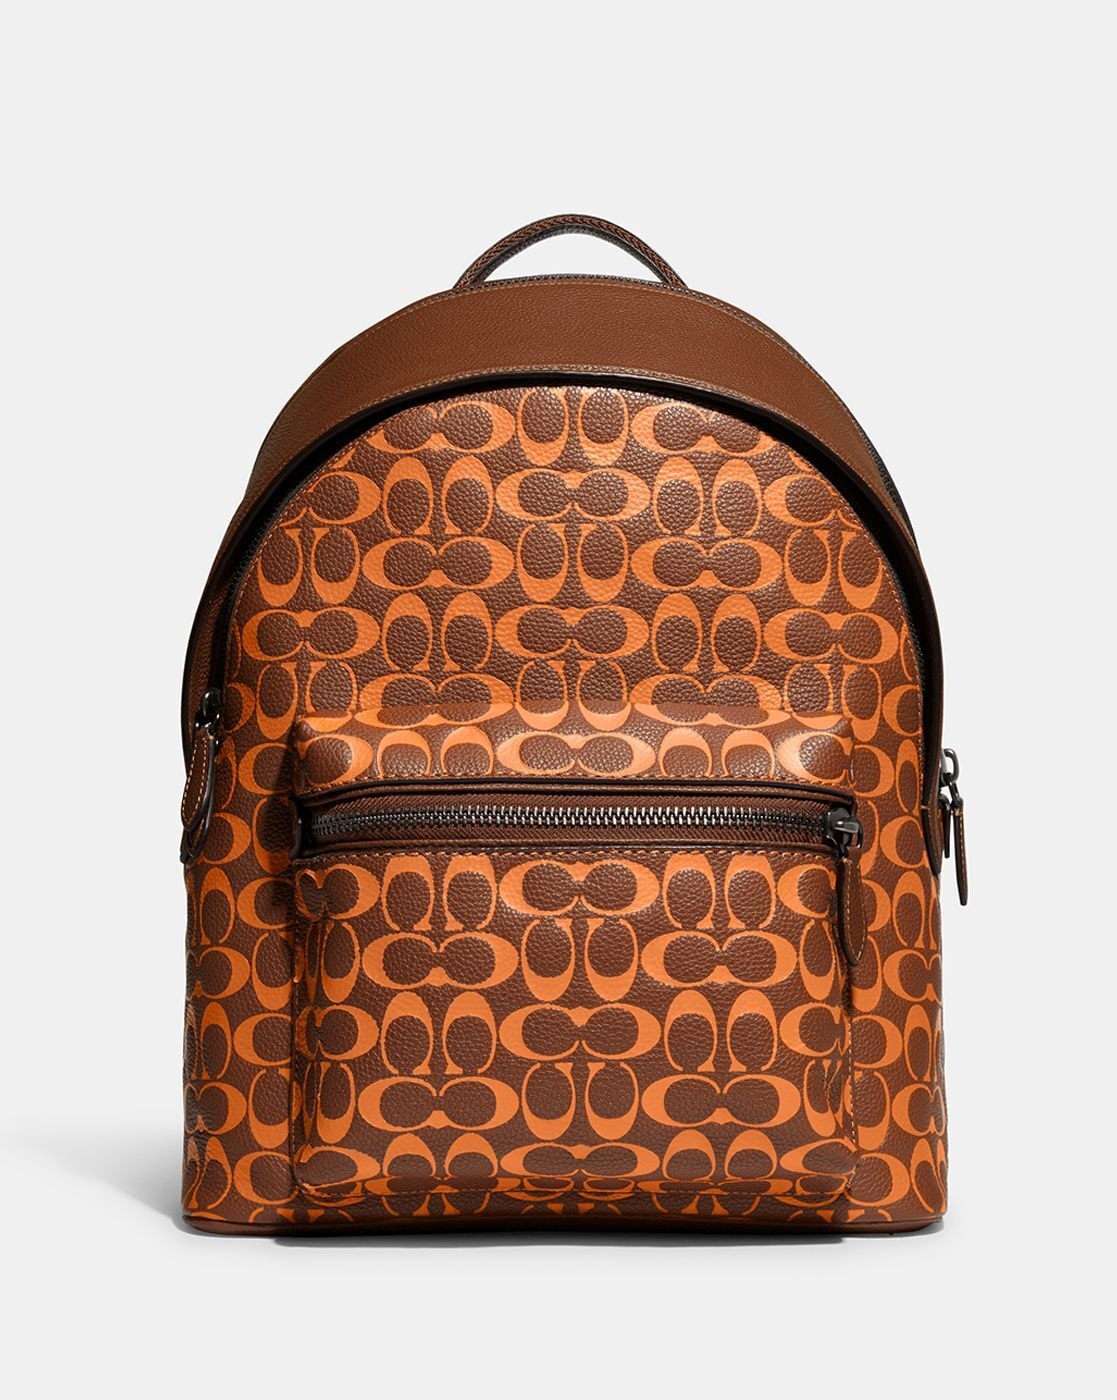 New Coach Original Classic Signature Brown Collection Liam Compact